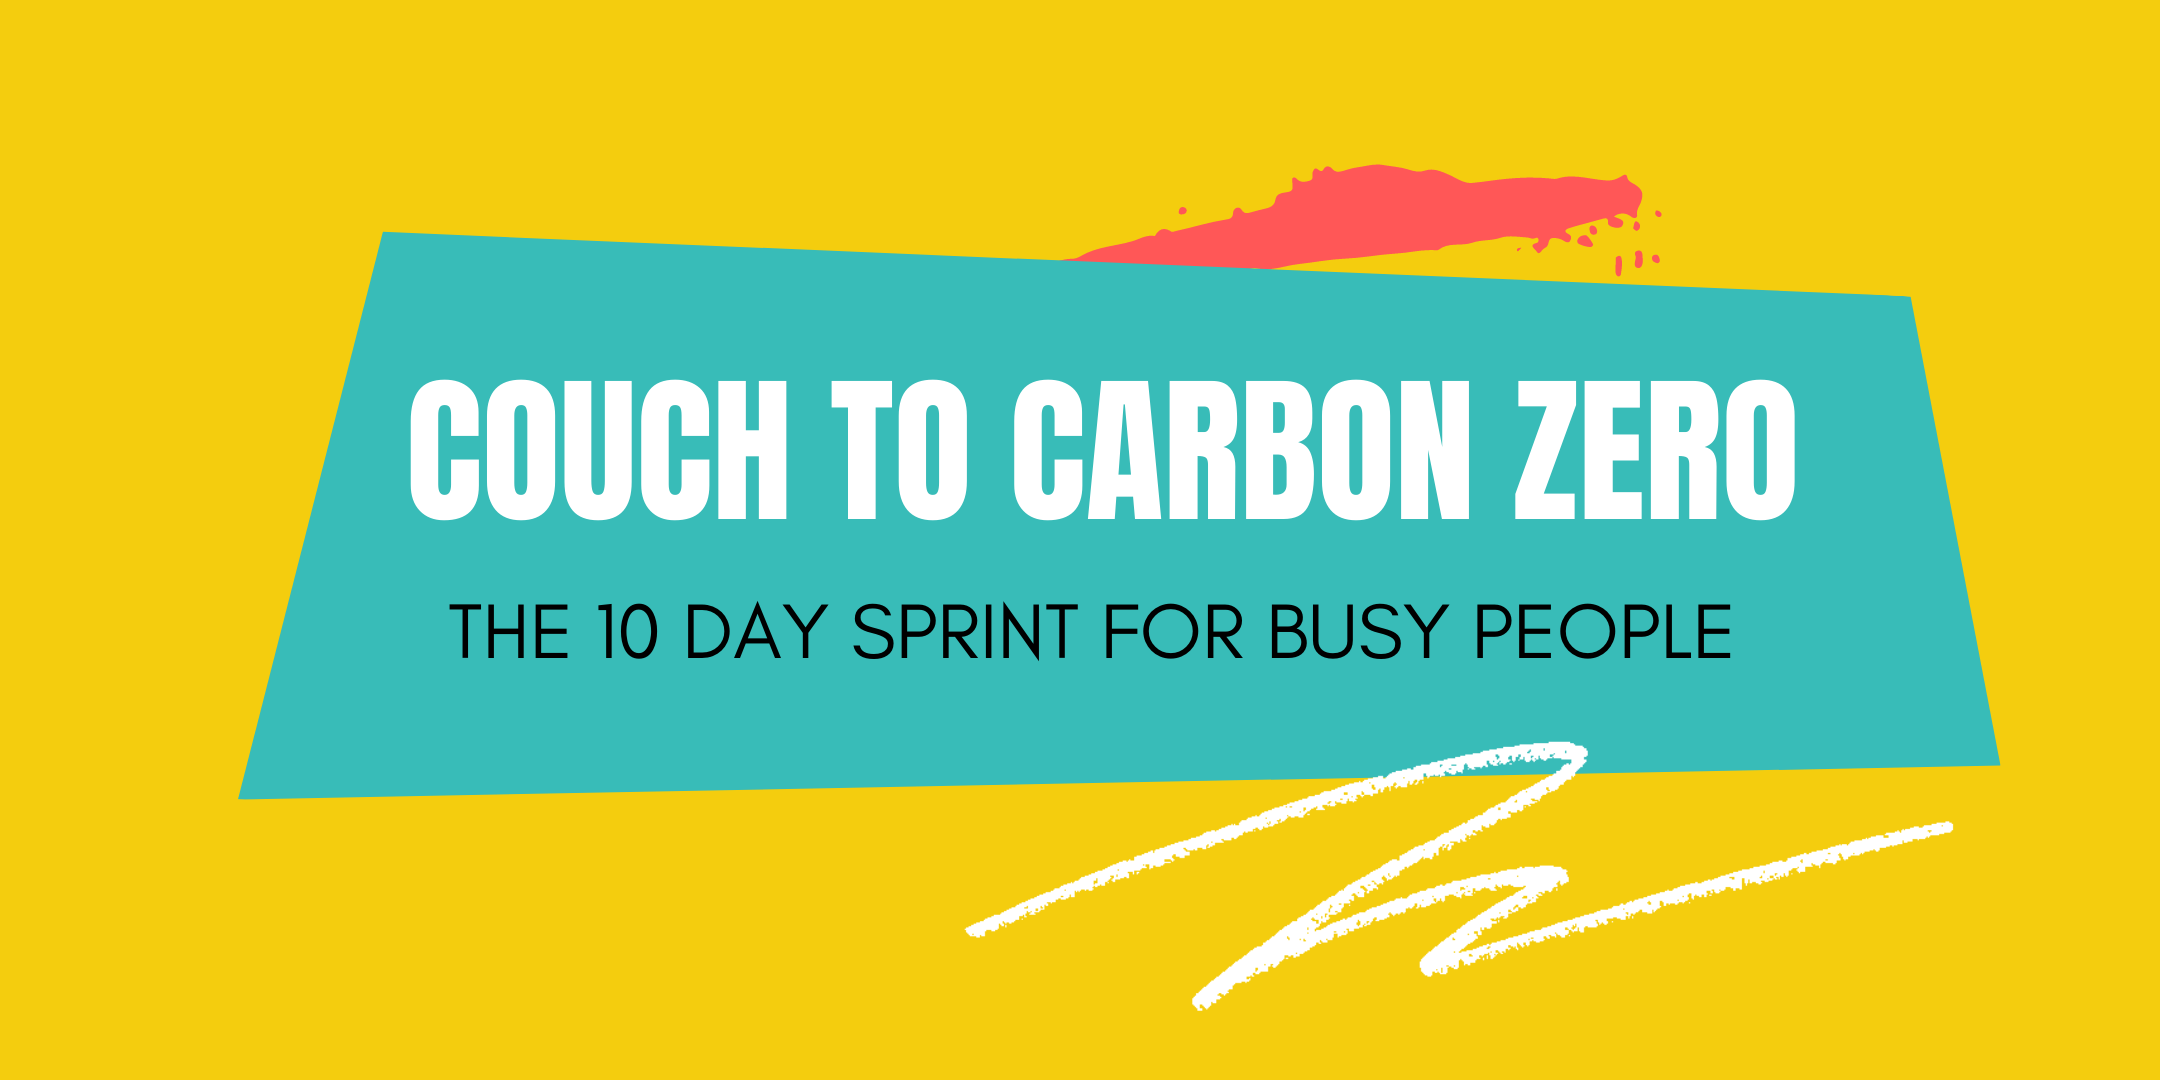 COUCH TO CARBON ZERO: Up your own ante and maximise your impact!